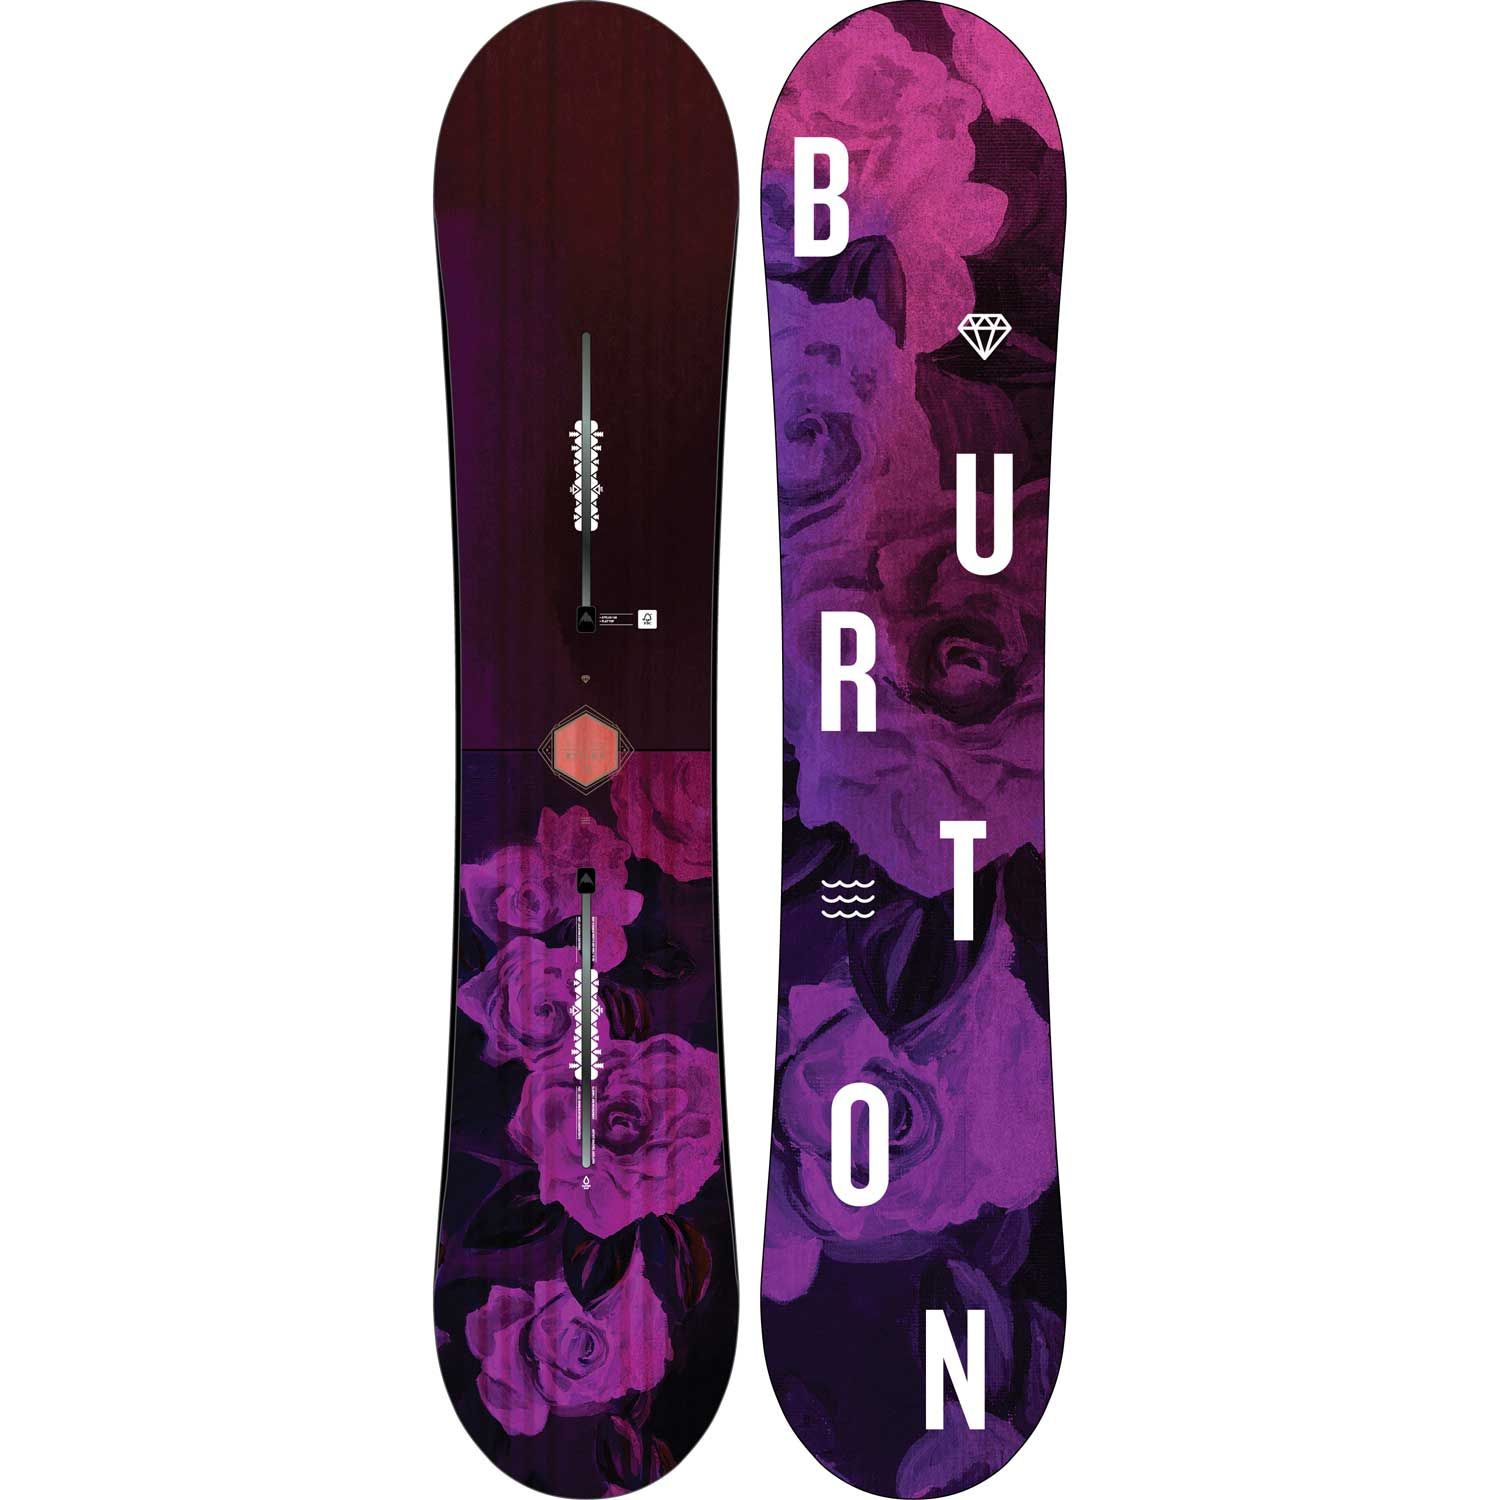 Pack Planche snowboard Stylus + Fixations